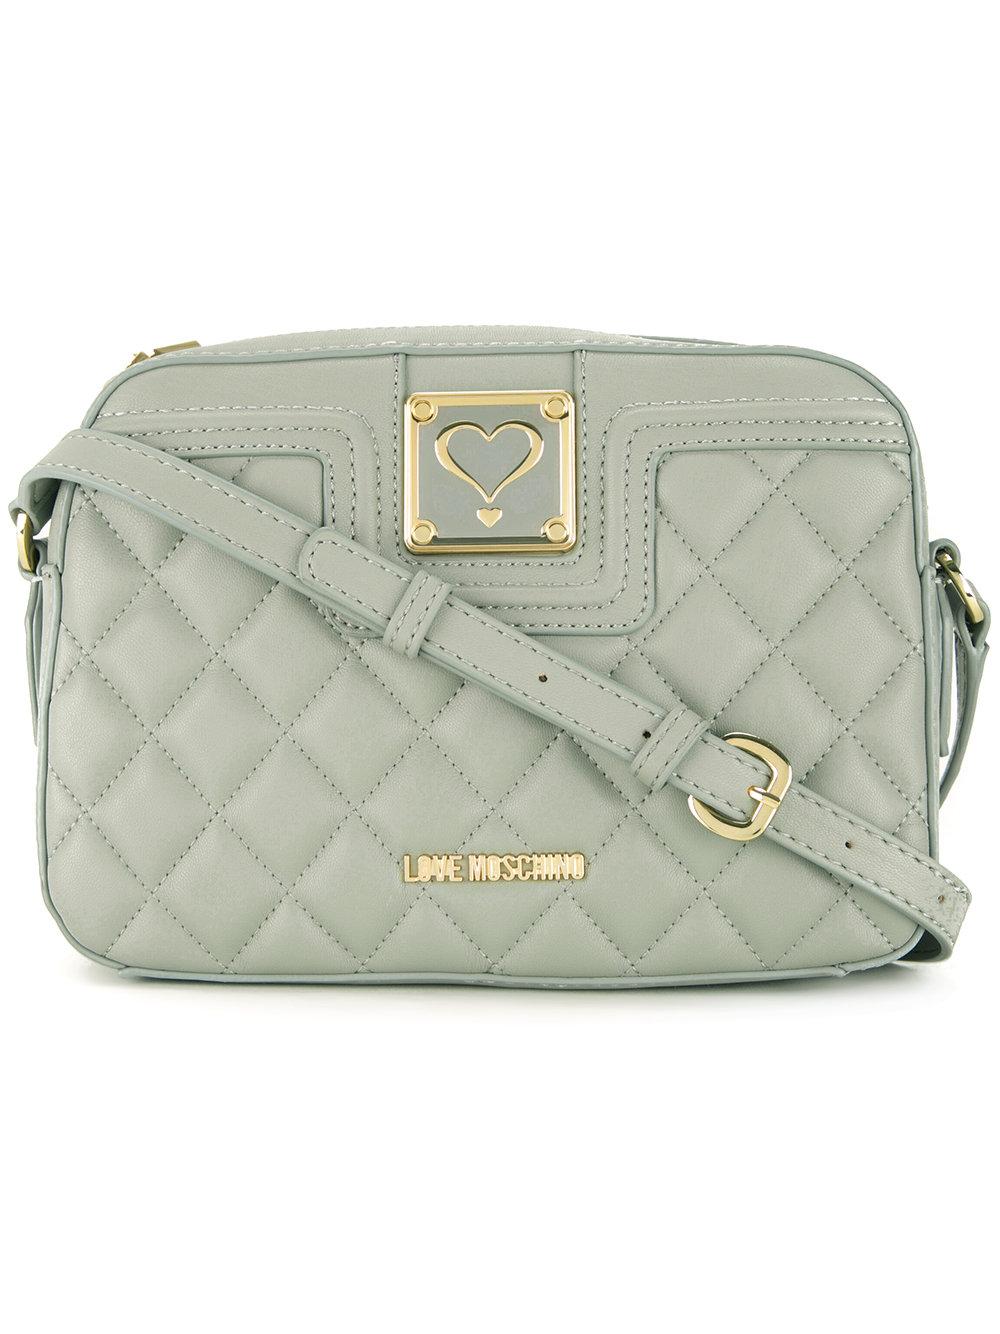 Love Moschino Quilted Crossbody Bag in Gray - Lyst